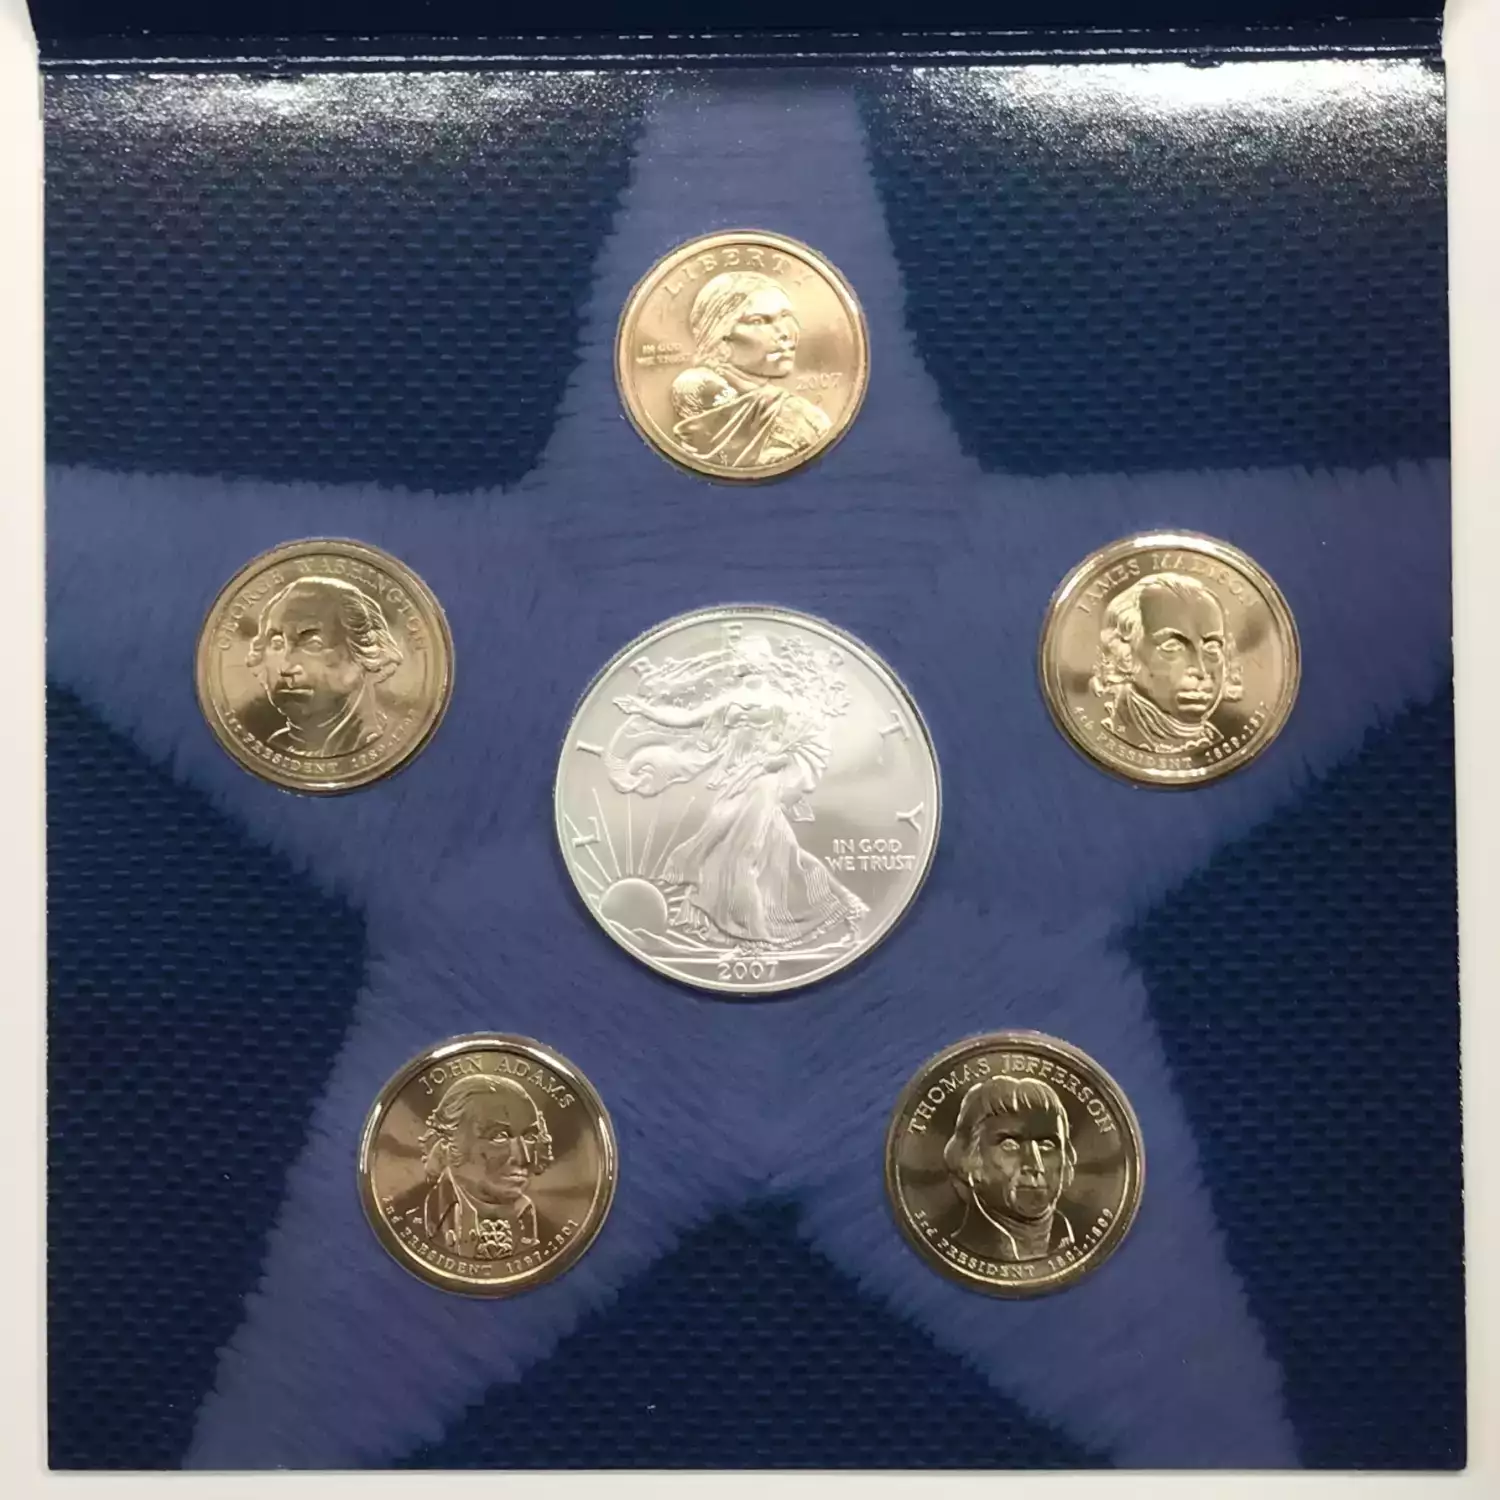 2007 Annual Uncirculated Dollar Coin Set incl W Burnished Silver Eagle - US Mint (2)